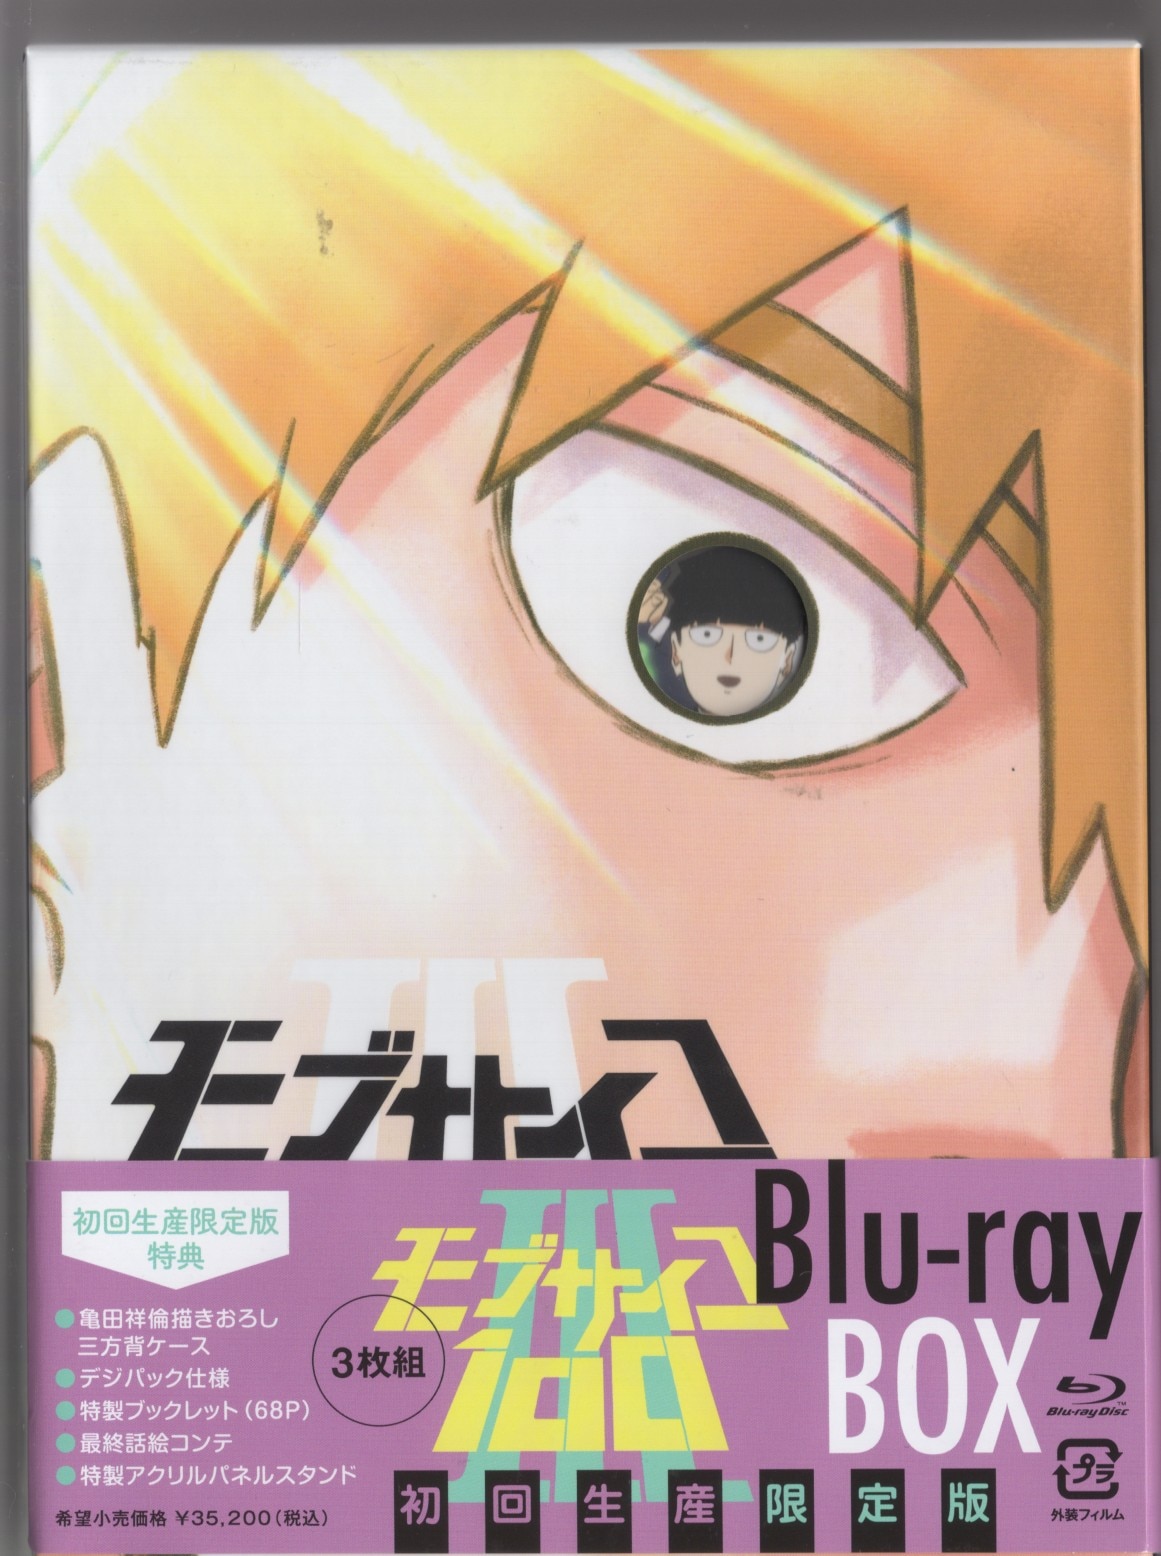 Mob Psycho 100 III Blu-ray Box First Limited Edition Booklet Japan